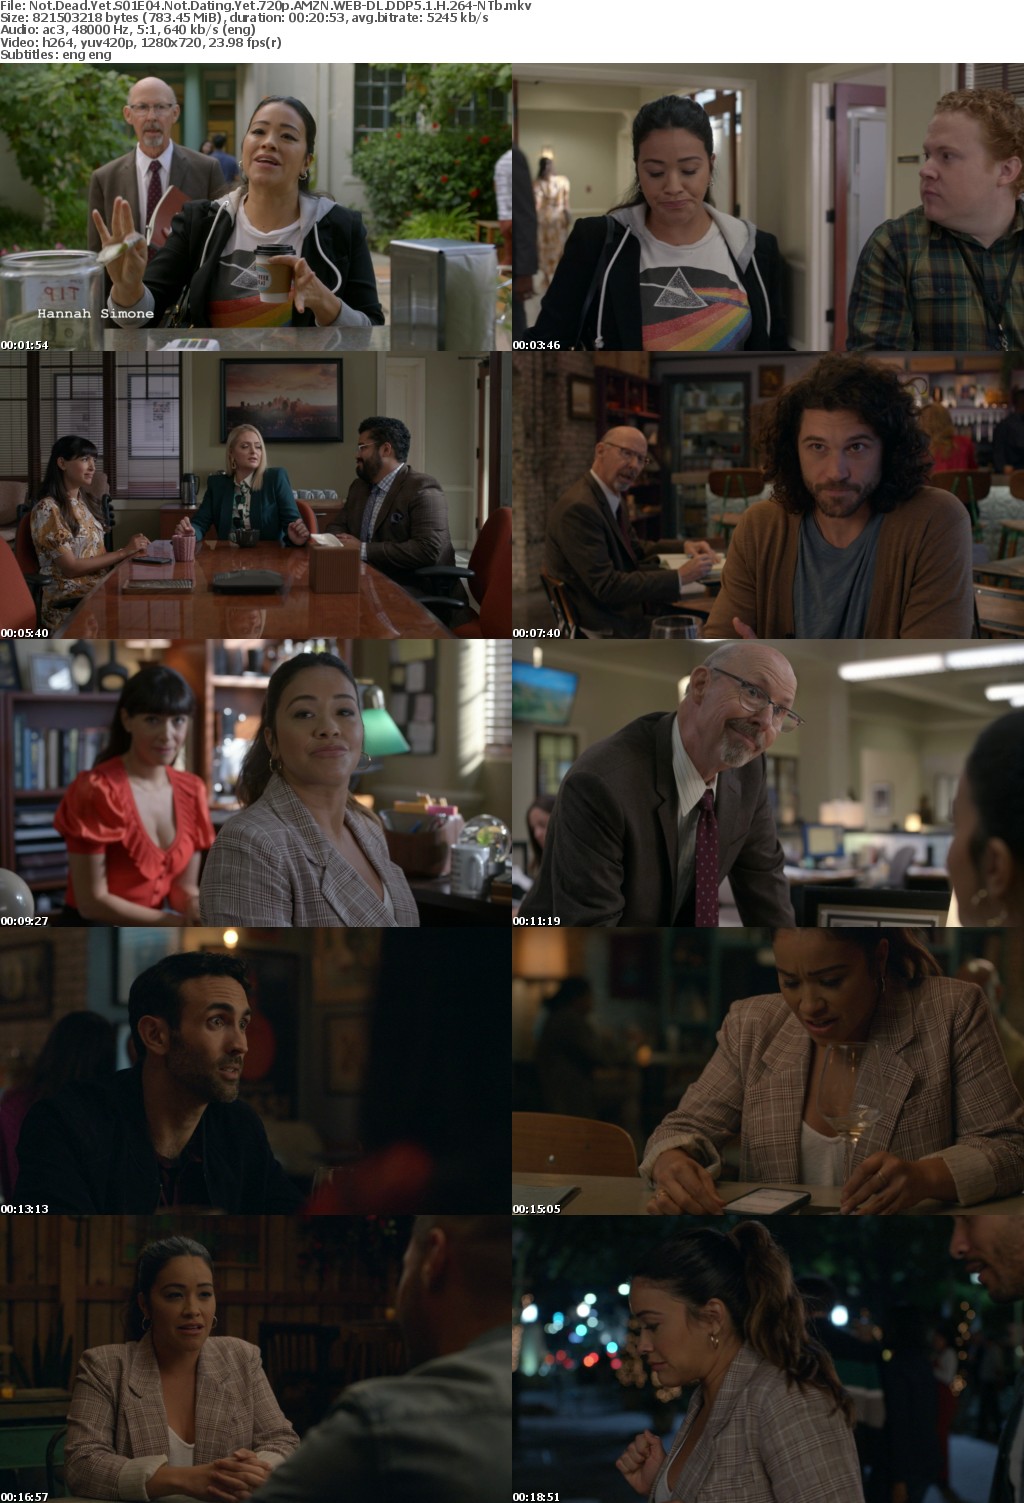 Not Dead Yet S01E04 Not Dating Yet 720p AMZN WEBRip DDP5 1 x264-NTb